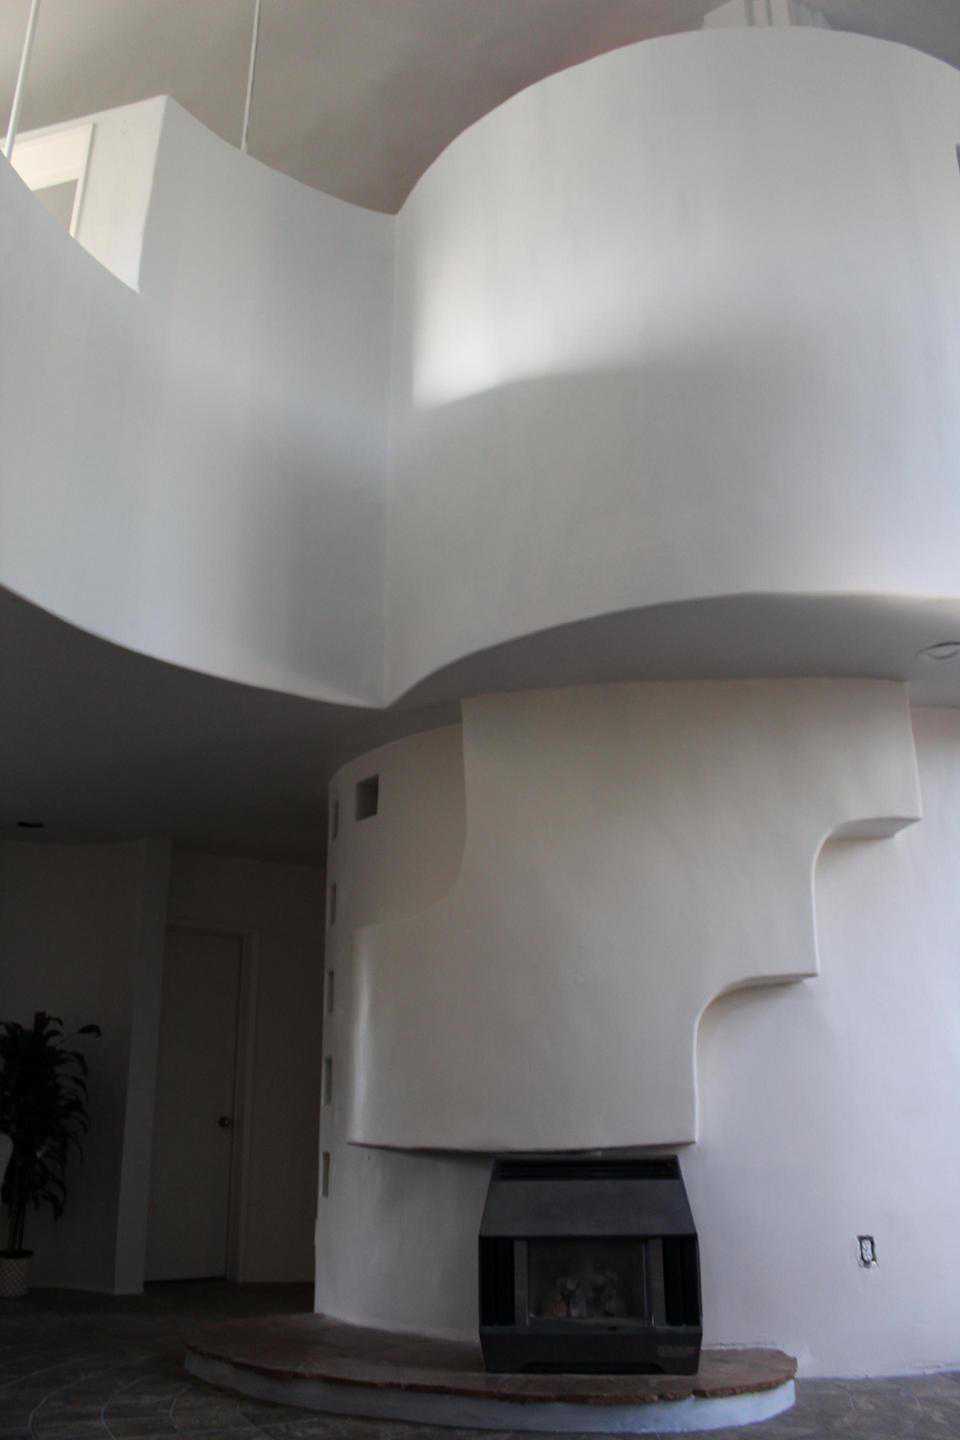 Curved walls